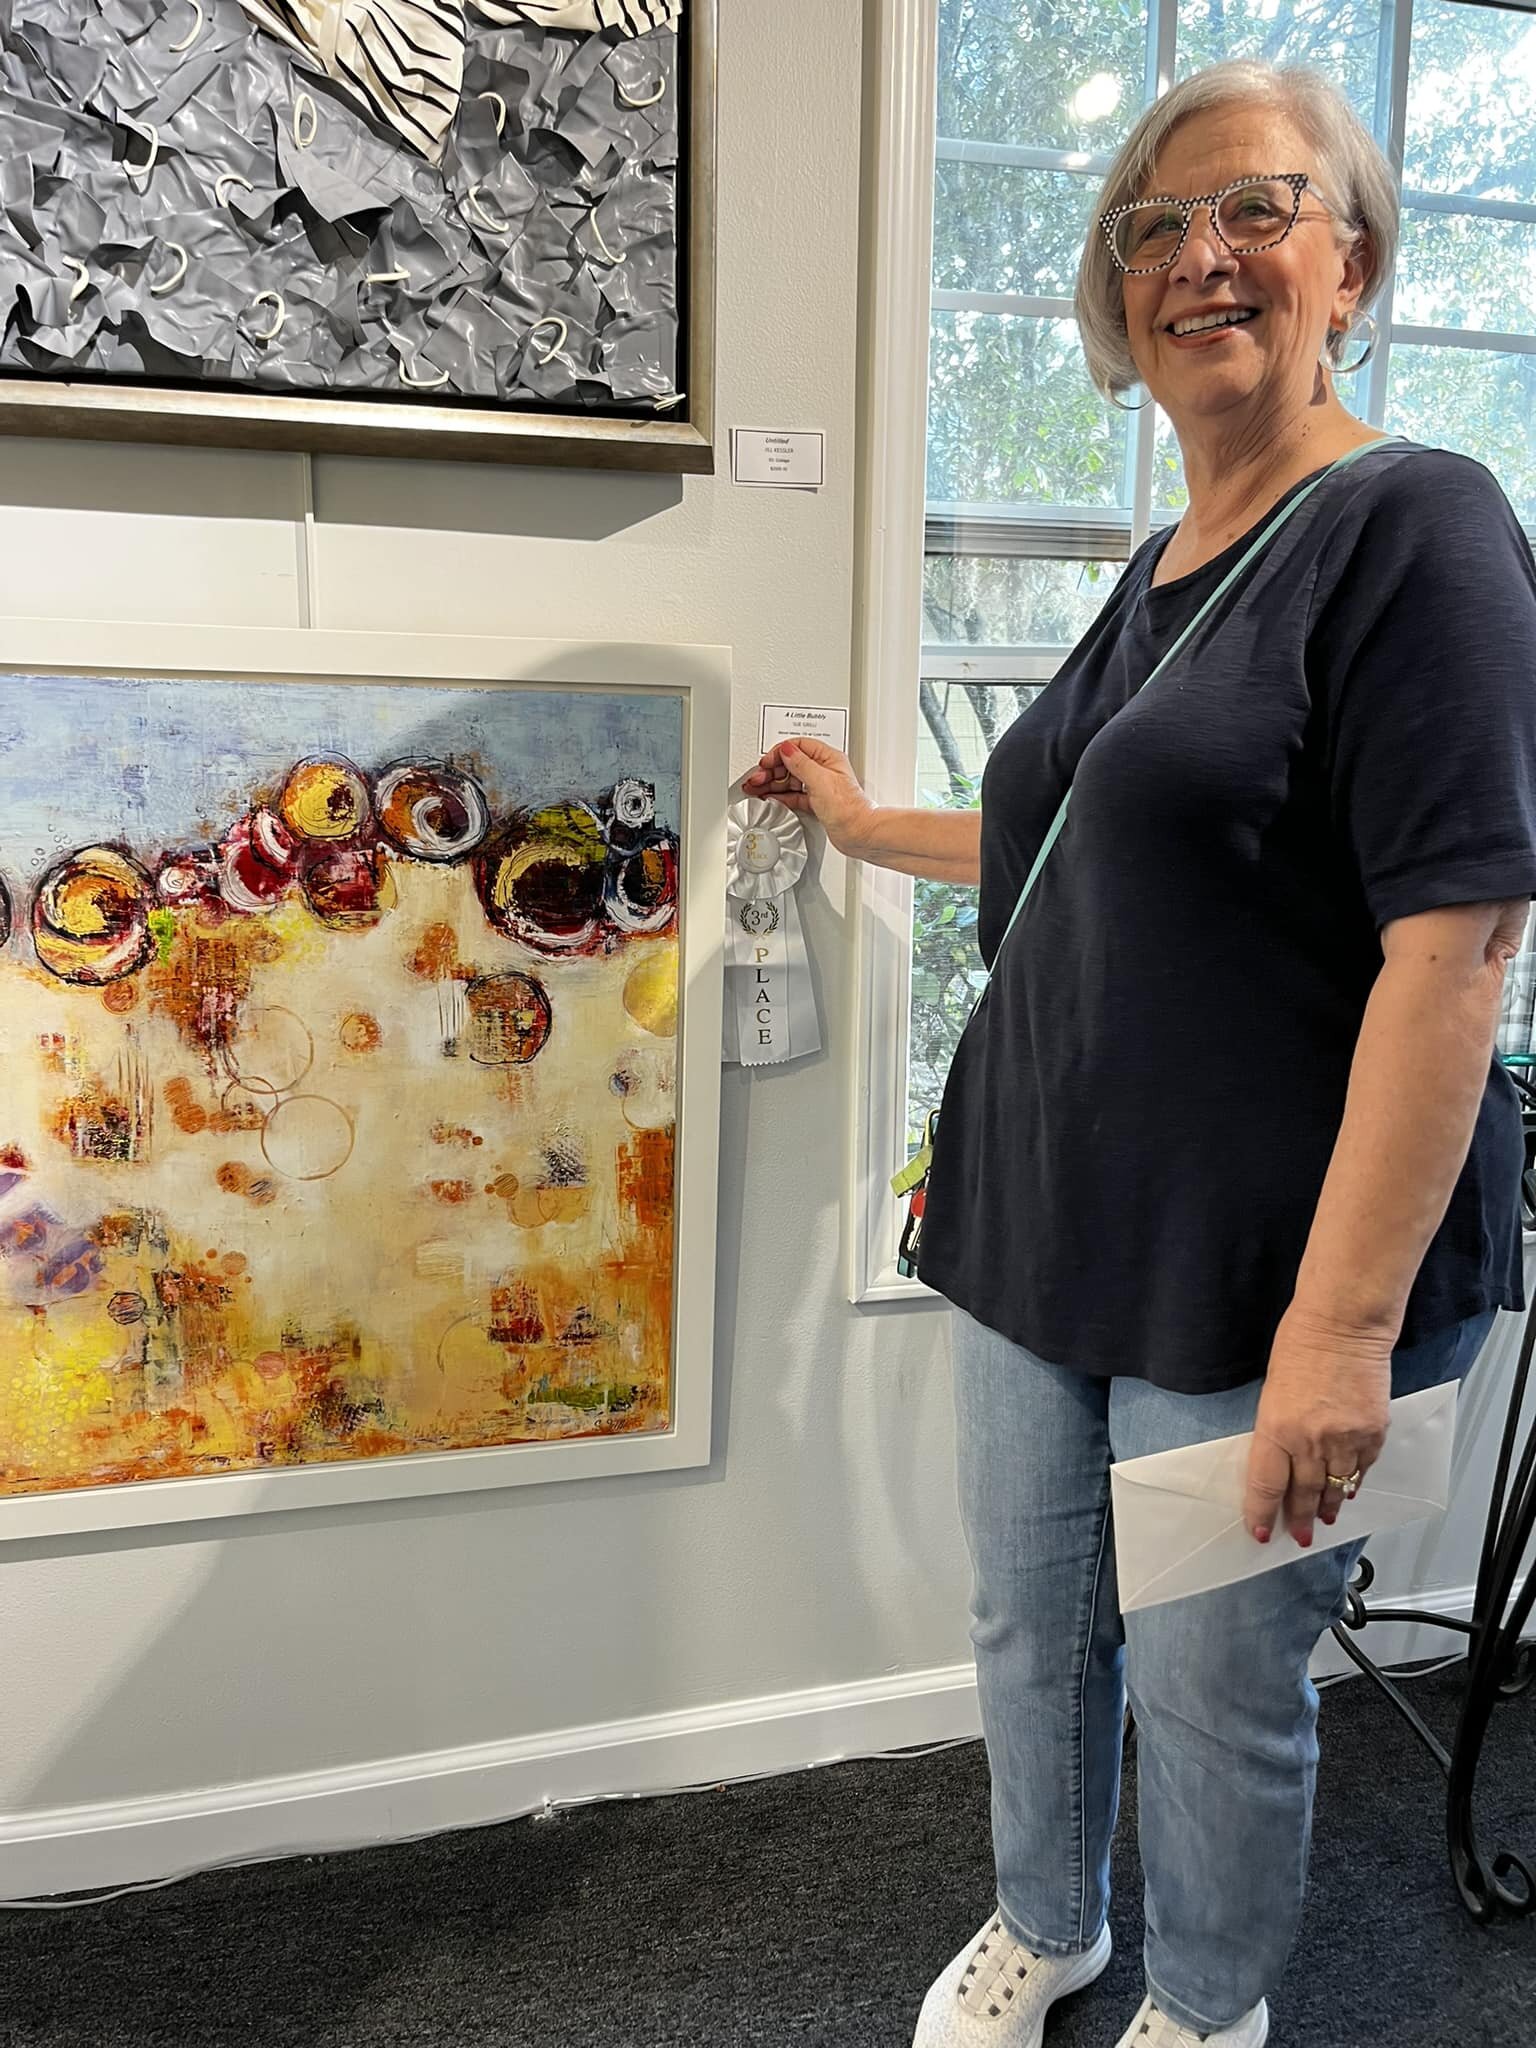 Honored to have received a 3rd place award for my painting &ldquo;A Little Bubbly&rdquo; at SOBA today.